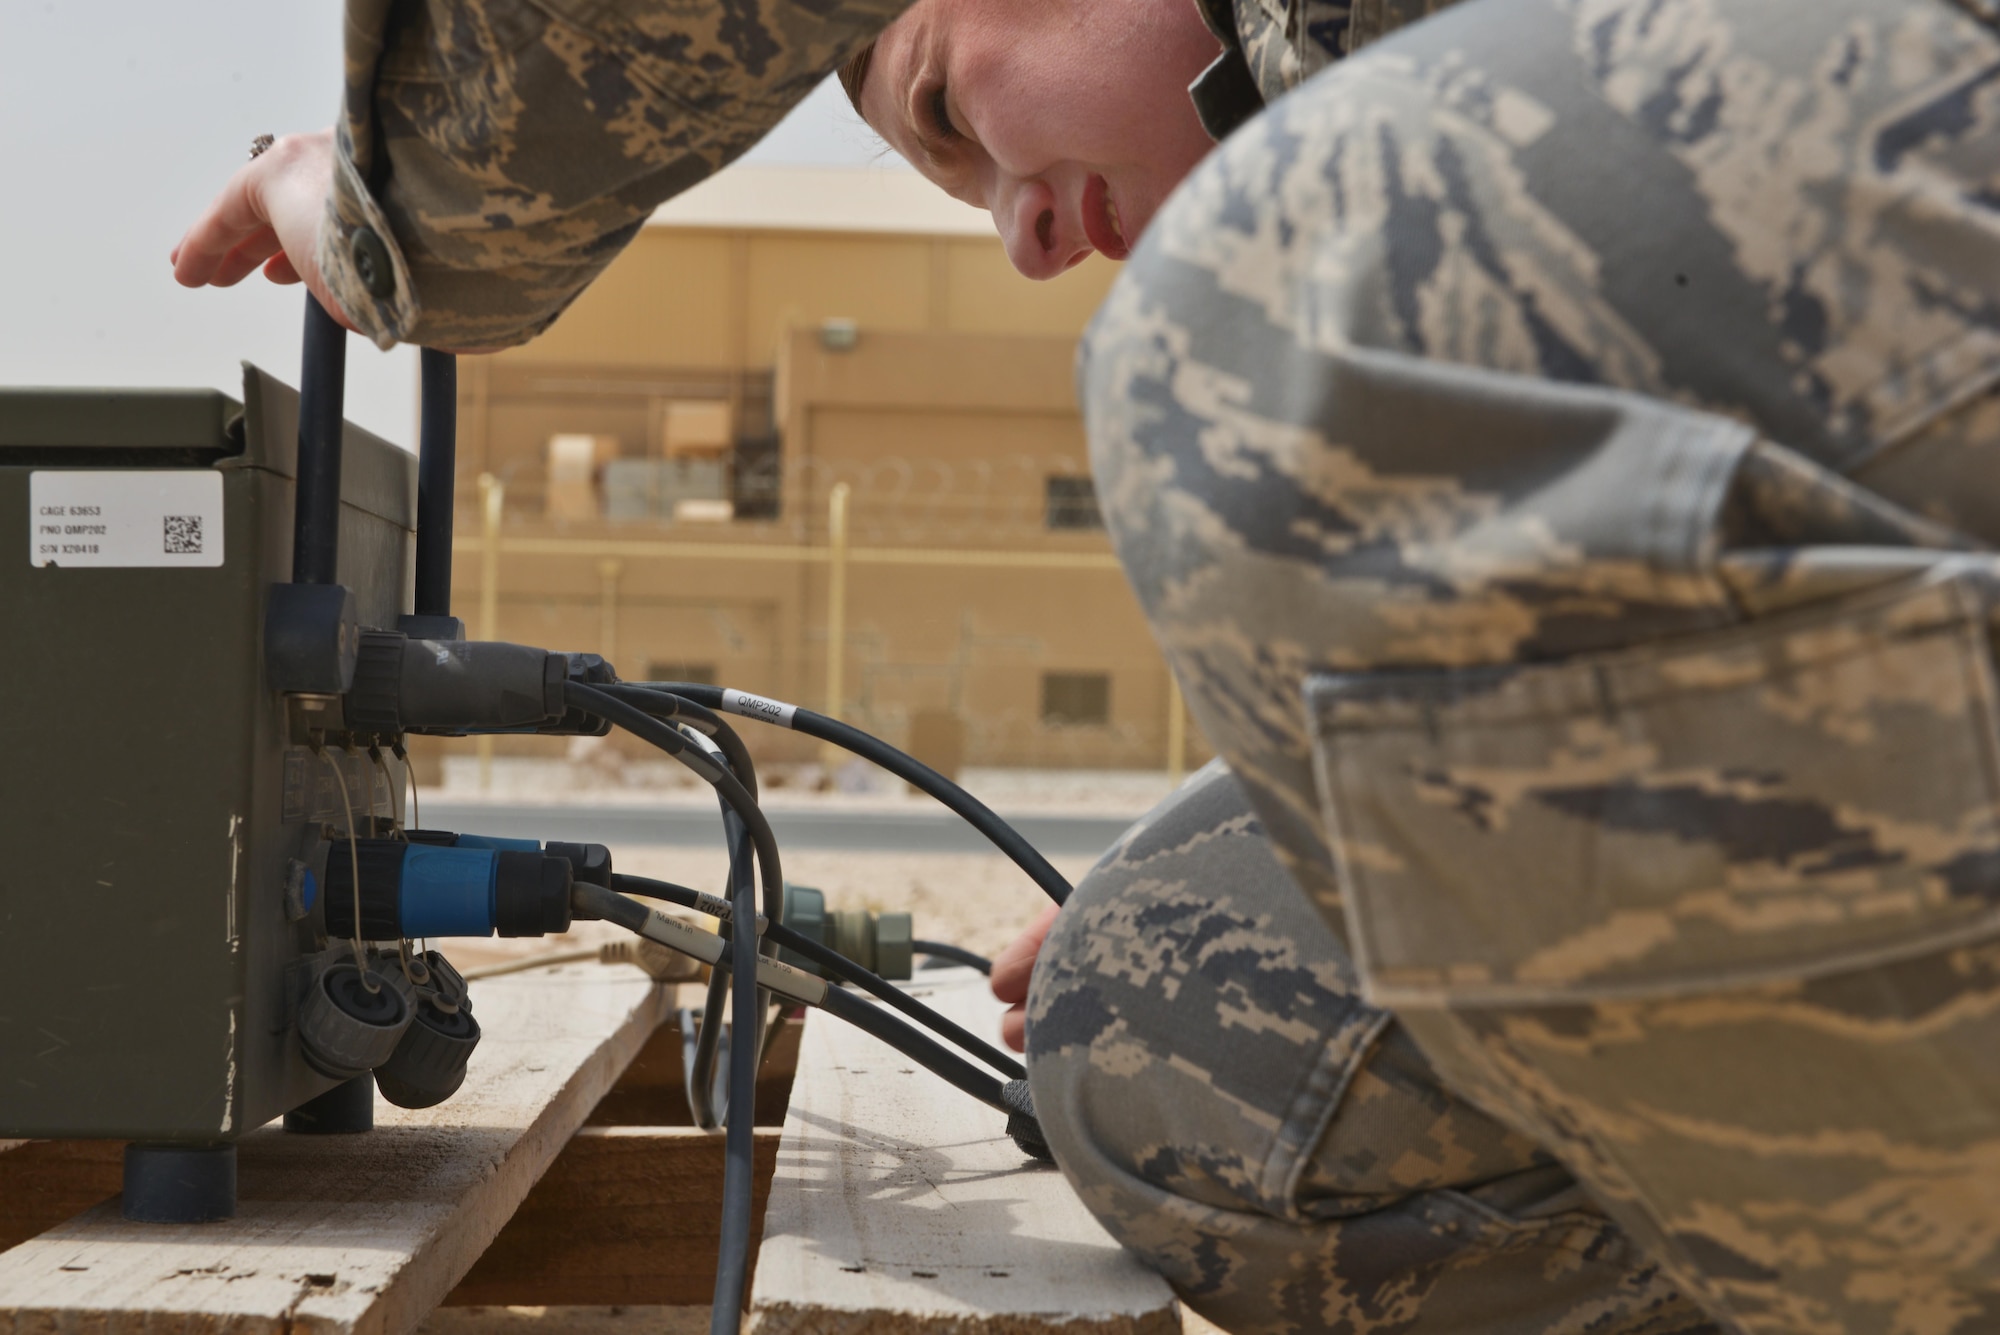 Tech. Sgt Vanessa Gonzales, 379th Expeditionary Operations Support Squadron weather forecaster, ensures connections are stable on a Tactical Meteorological Observing Sensor module July 8, 2015 Al Udeid Air Base, Qatar.  